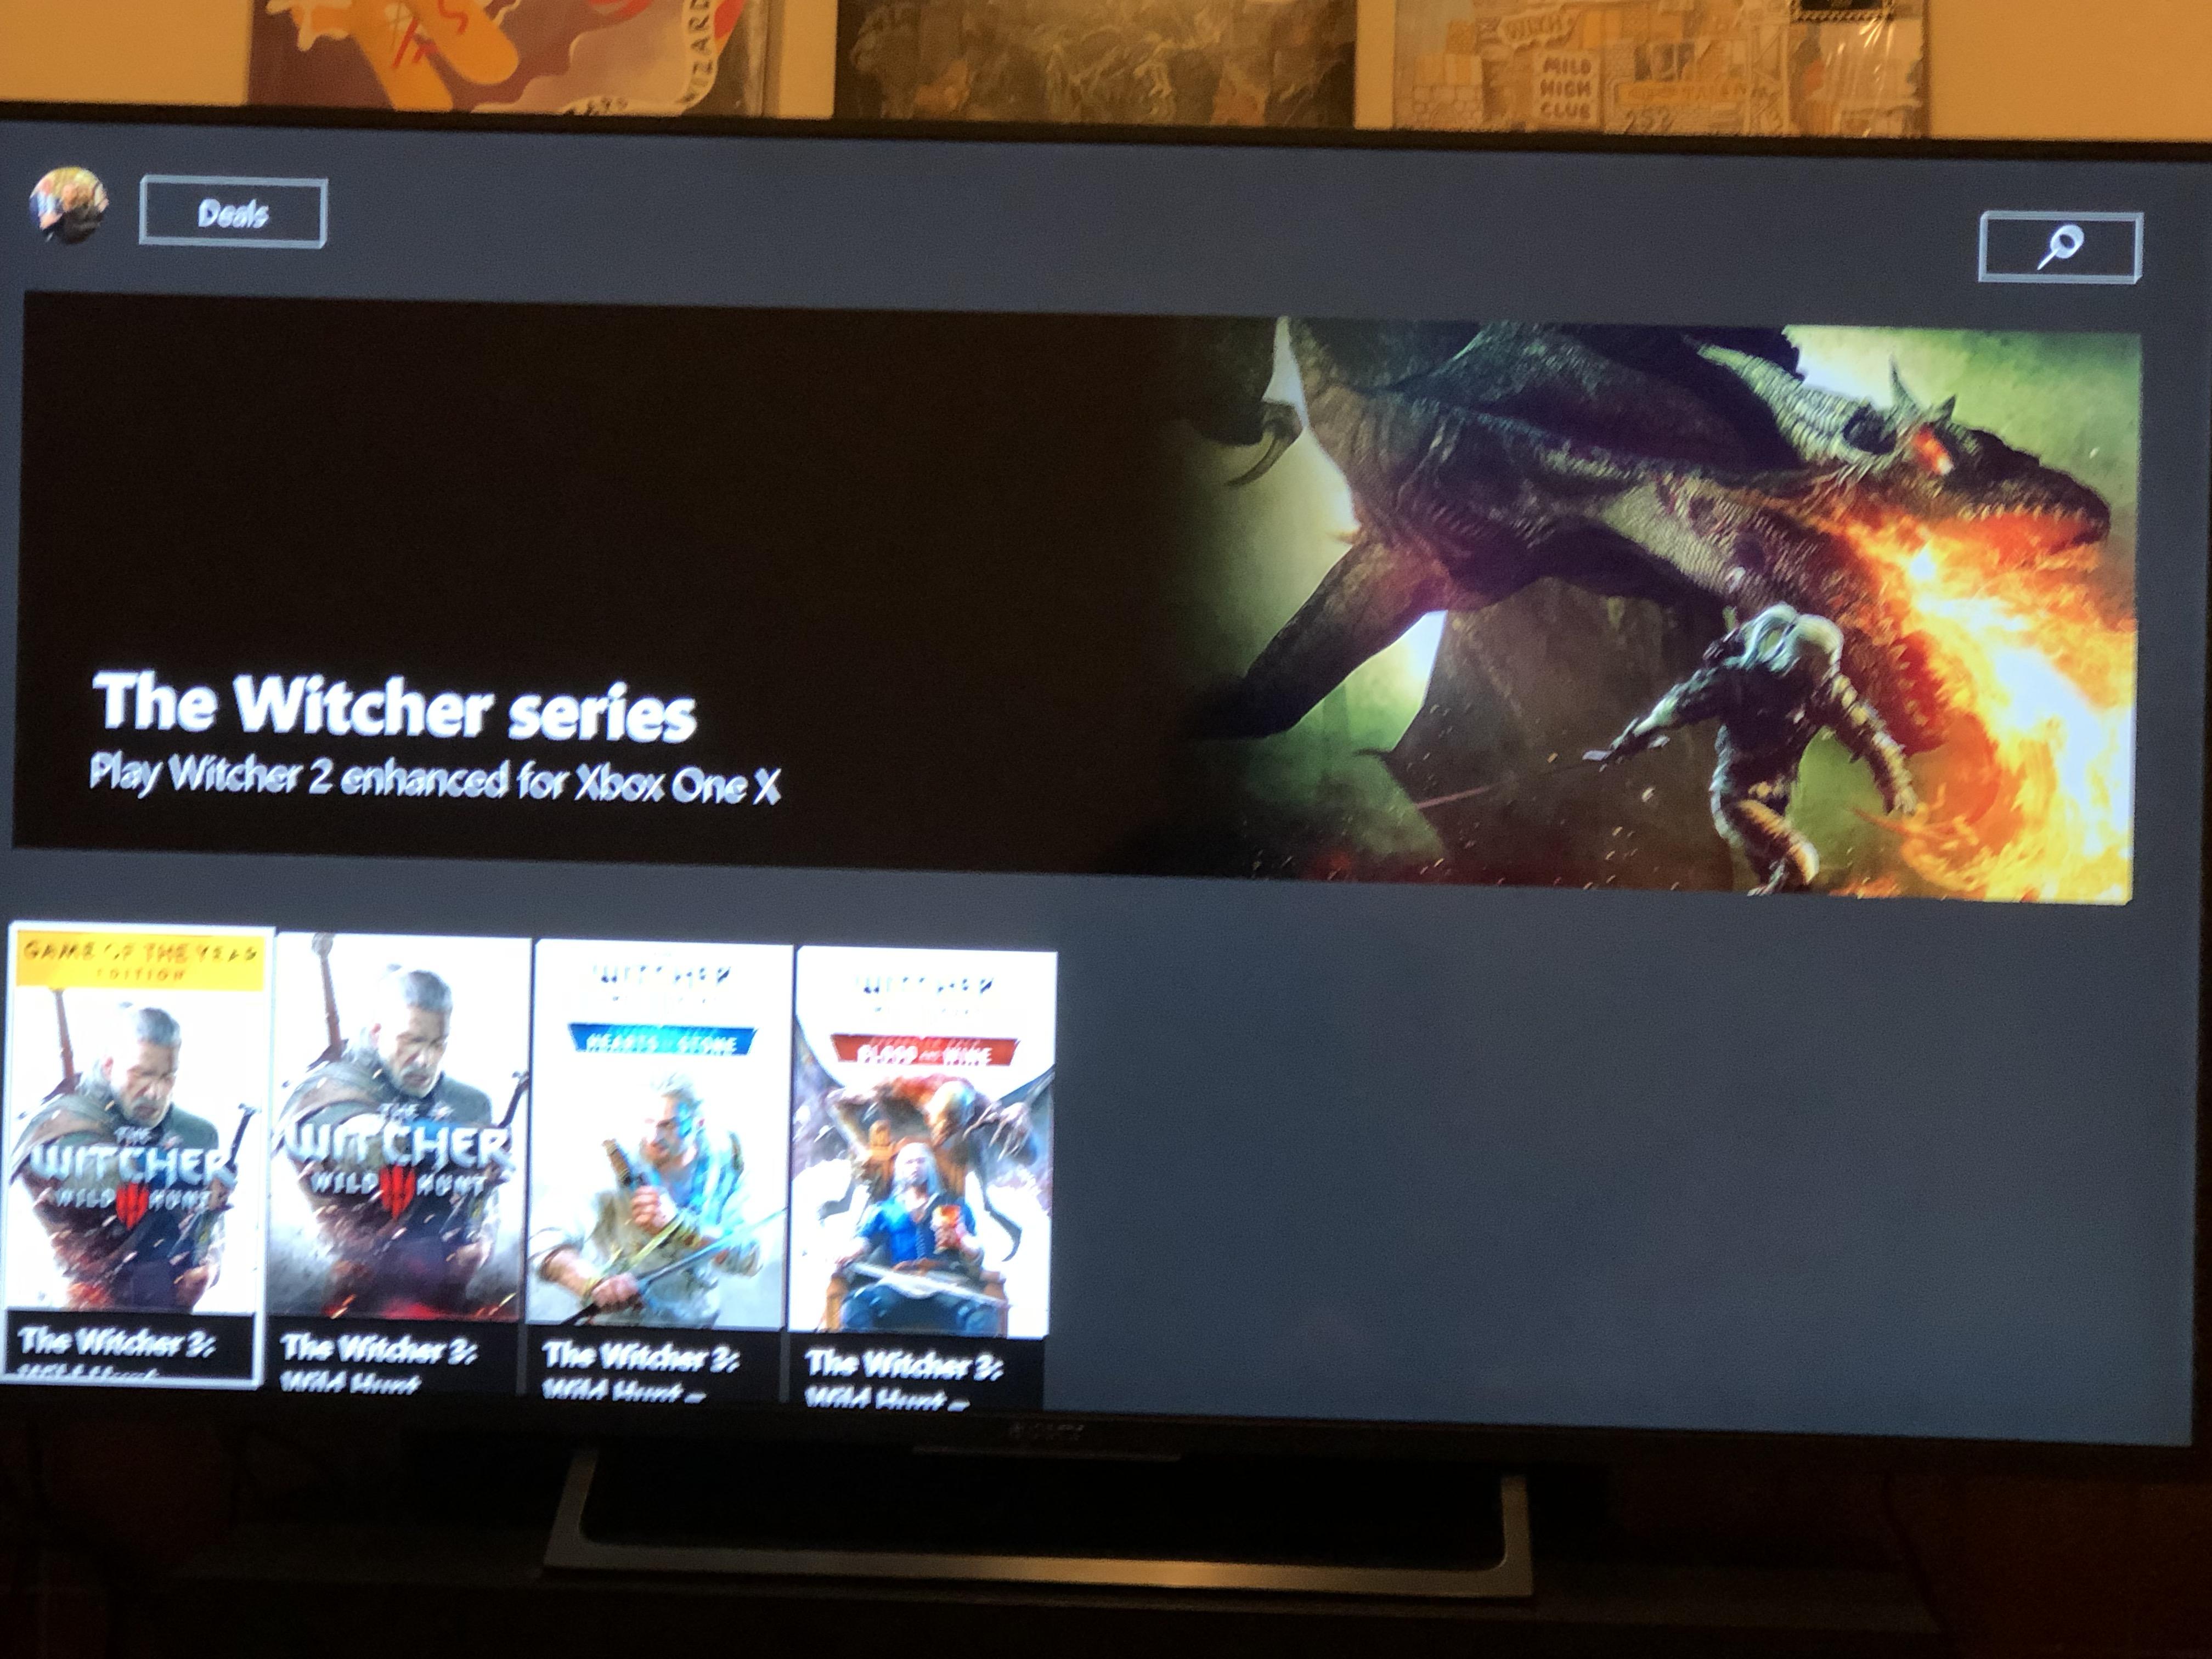 the witcher 2 xbox store